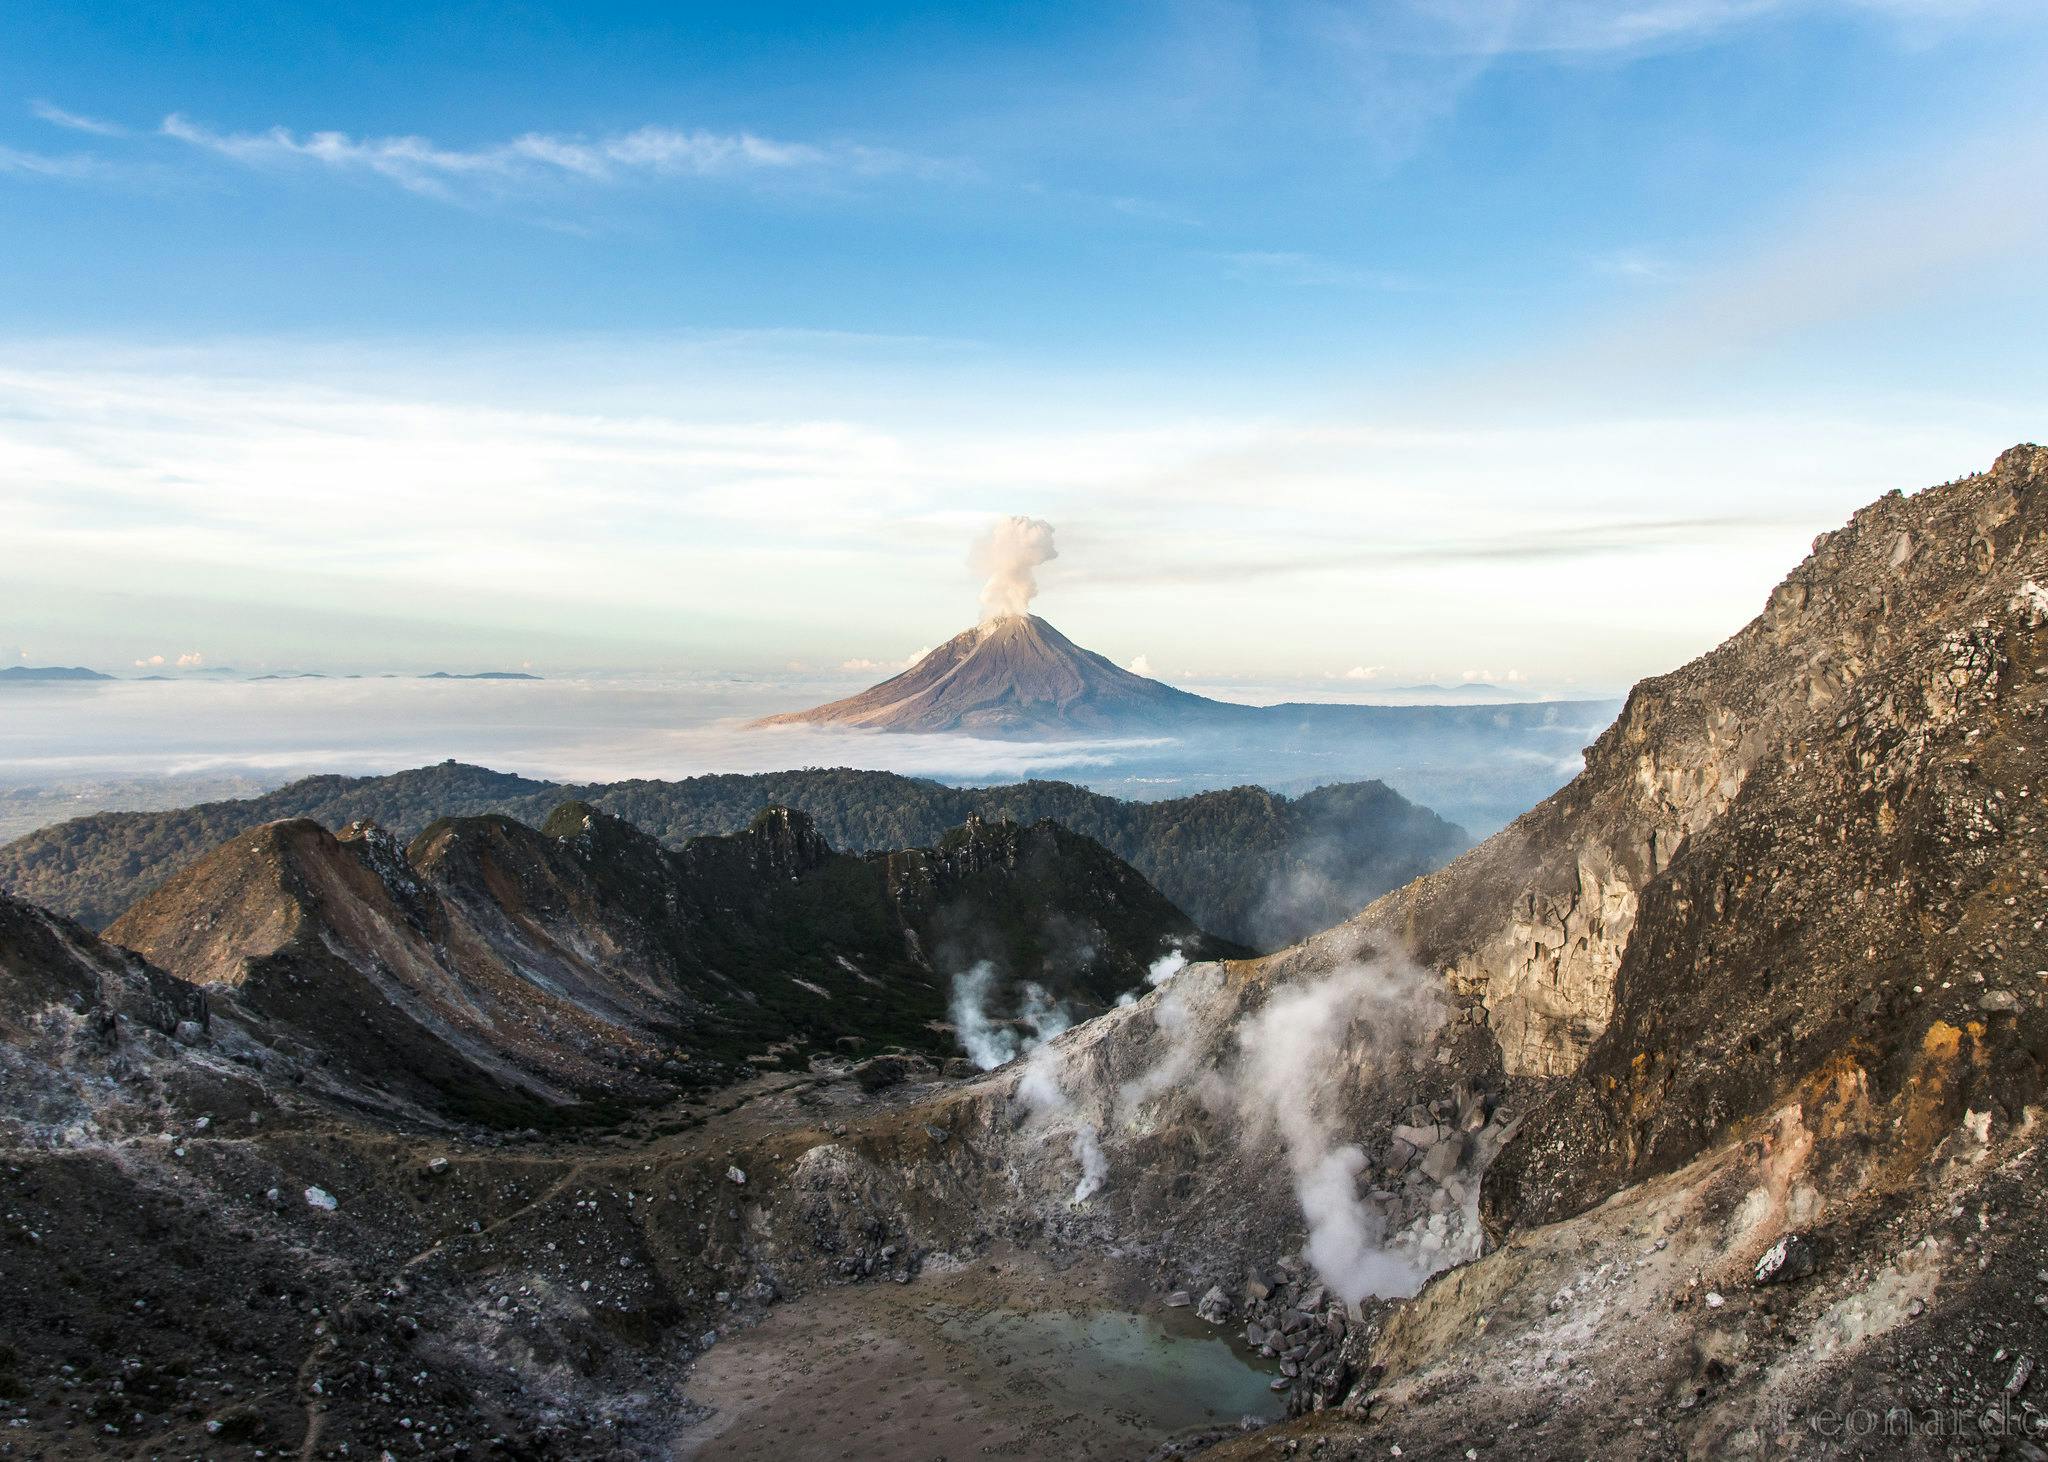 a volcano is visible sitting above clouds in the background. In the foreground are rocky hills and craters